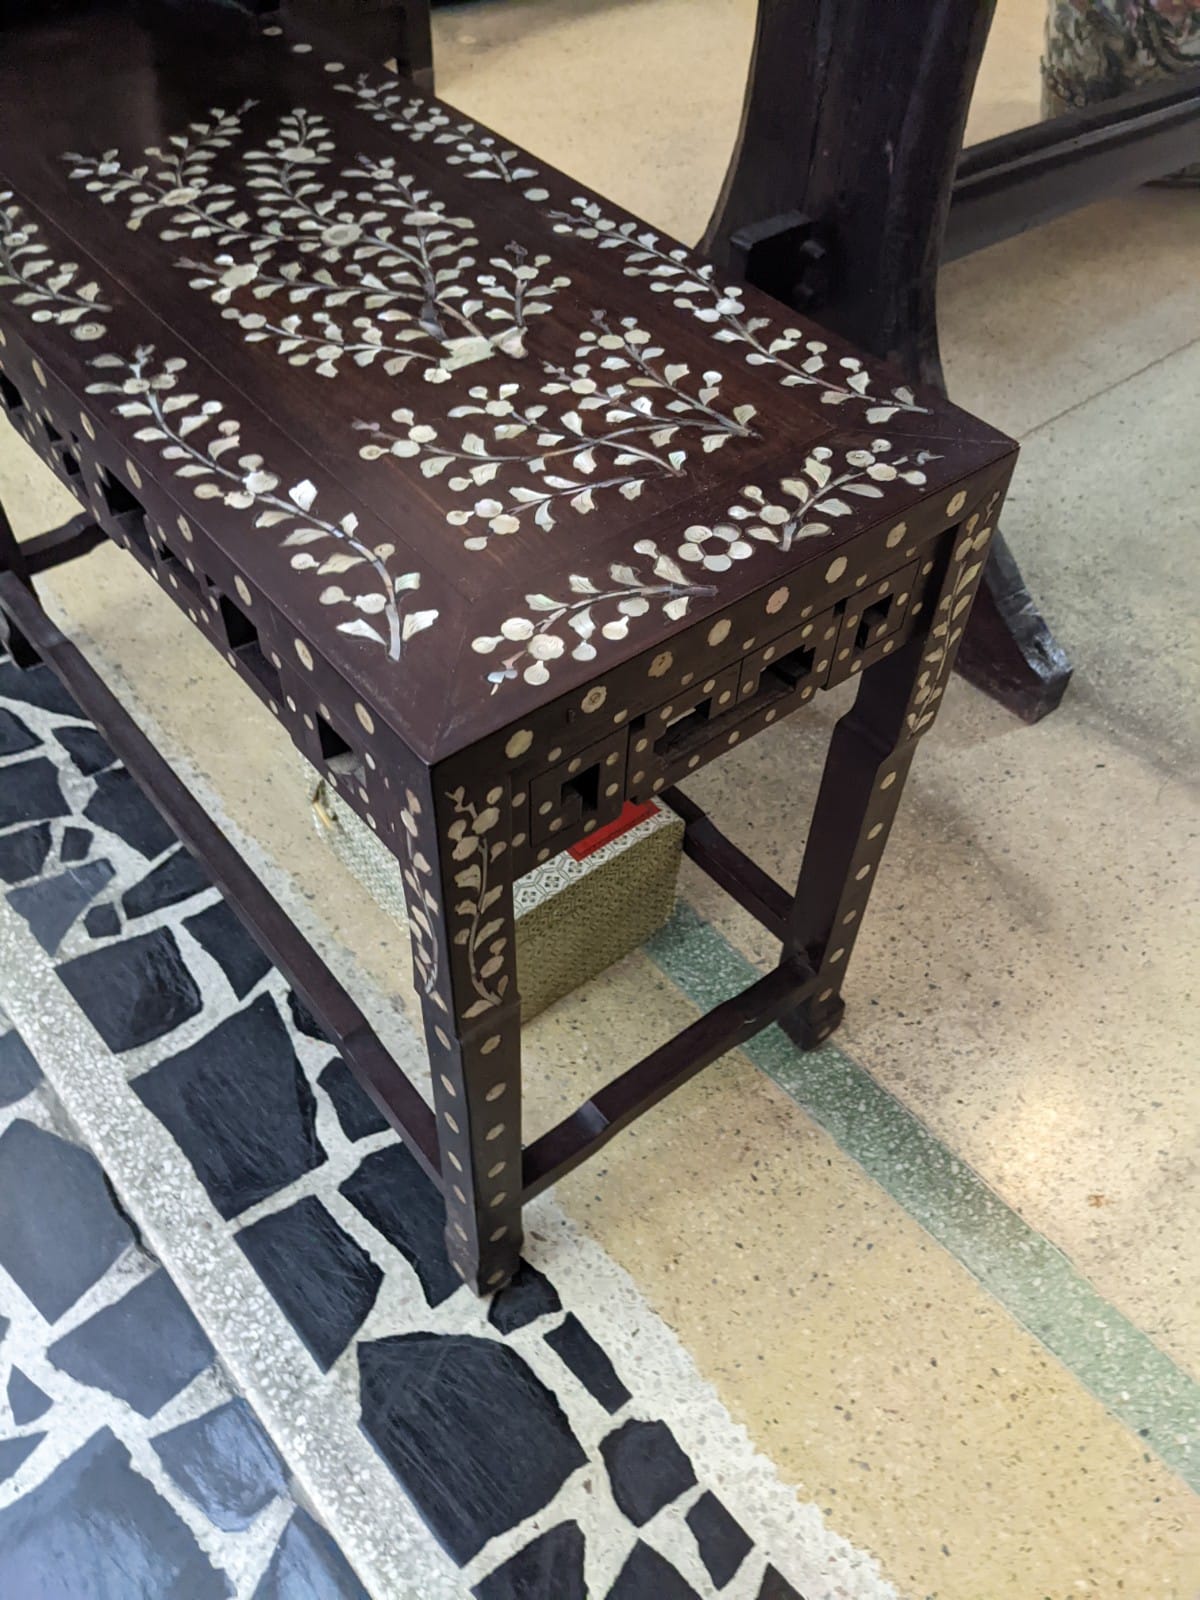 A PAIR OF MOTHER OF PEARL INLAID CHAIRS AND A SIDE TABLE - Image 22 of 23